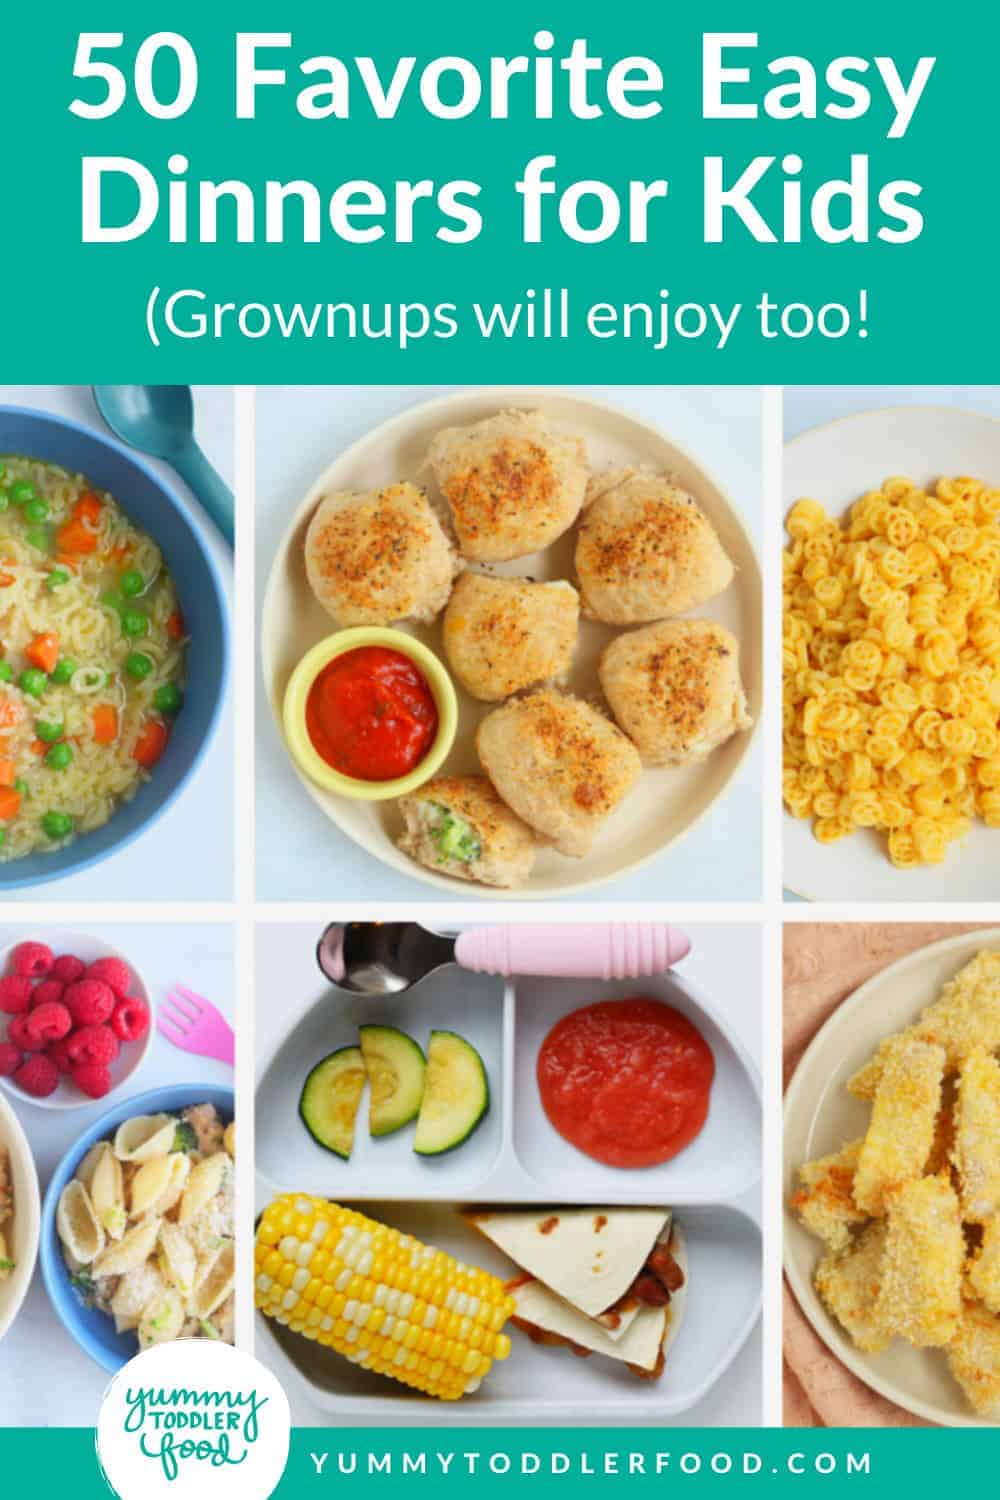 60 Favorite Dinner Ideas for Kids (Easy, Yummy, and Nutritious)